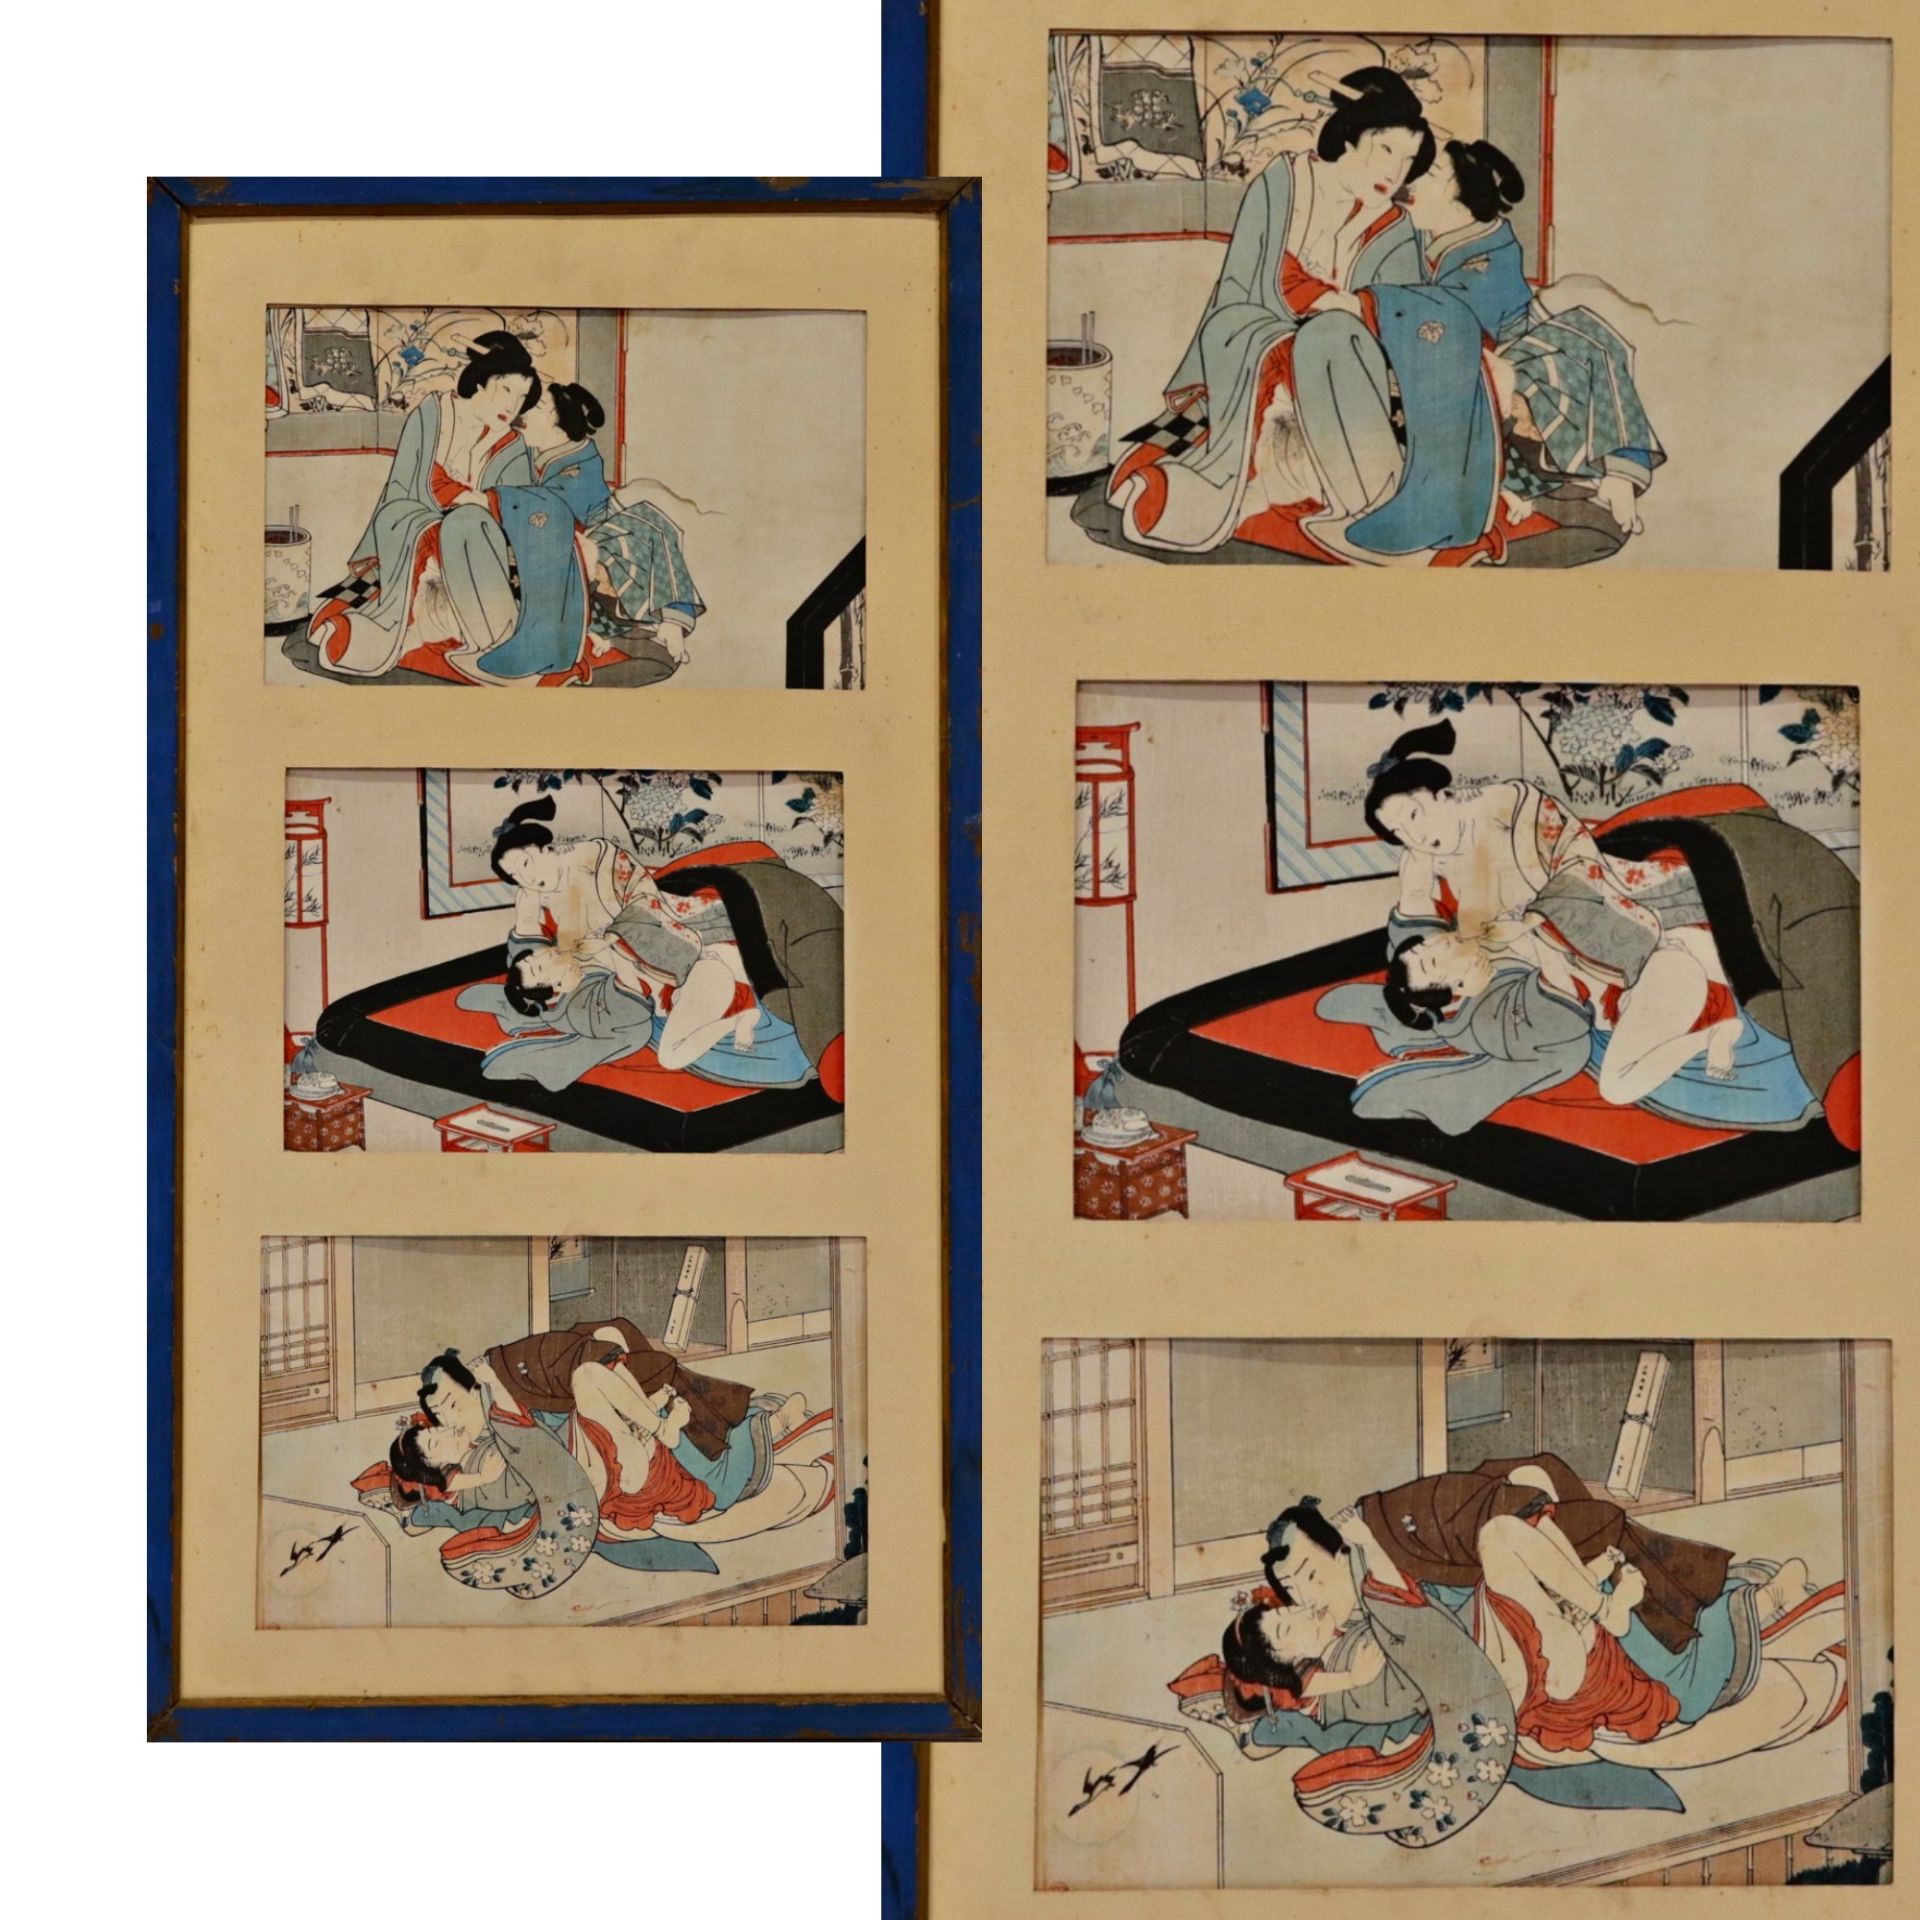 Three Antique Original Japanese Erotic Prints, 19th _. Japanese art, Collectible art for home decor.